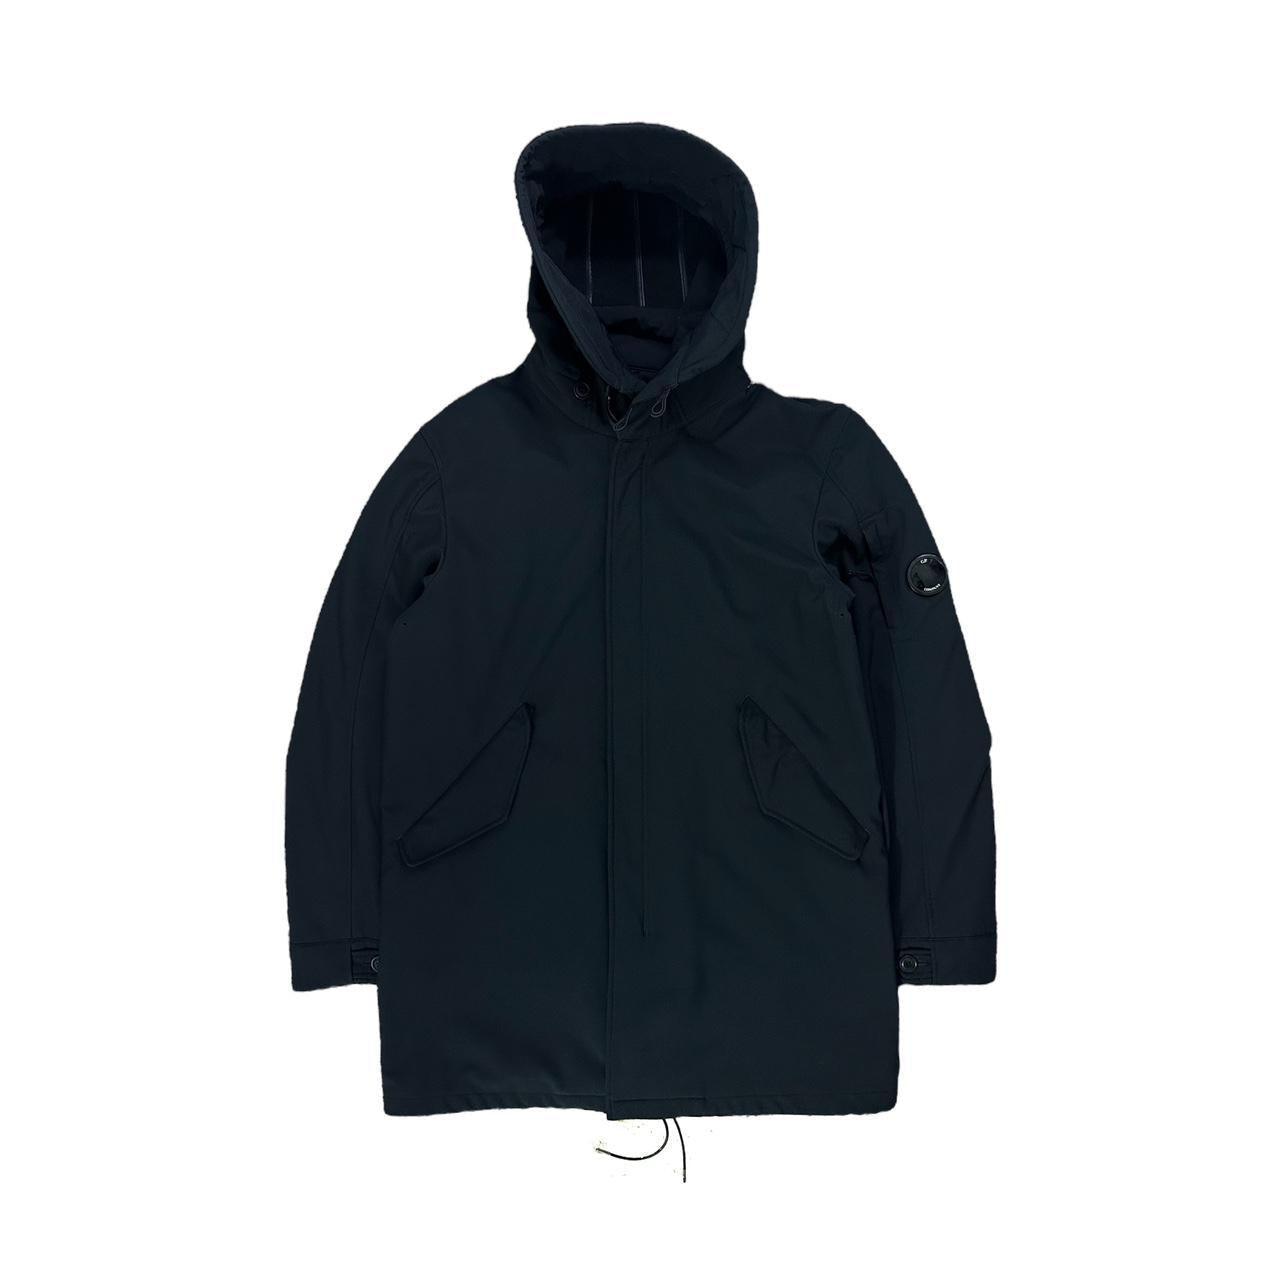 CP Company Soft Shell Fishtail Parka Jacket - Known Source